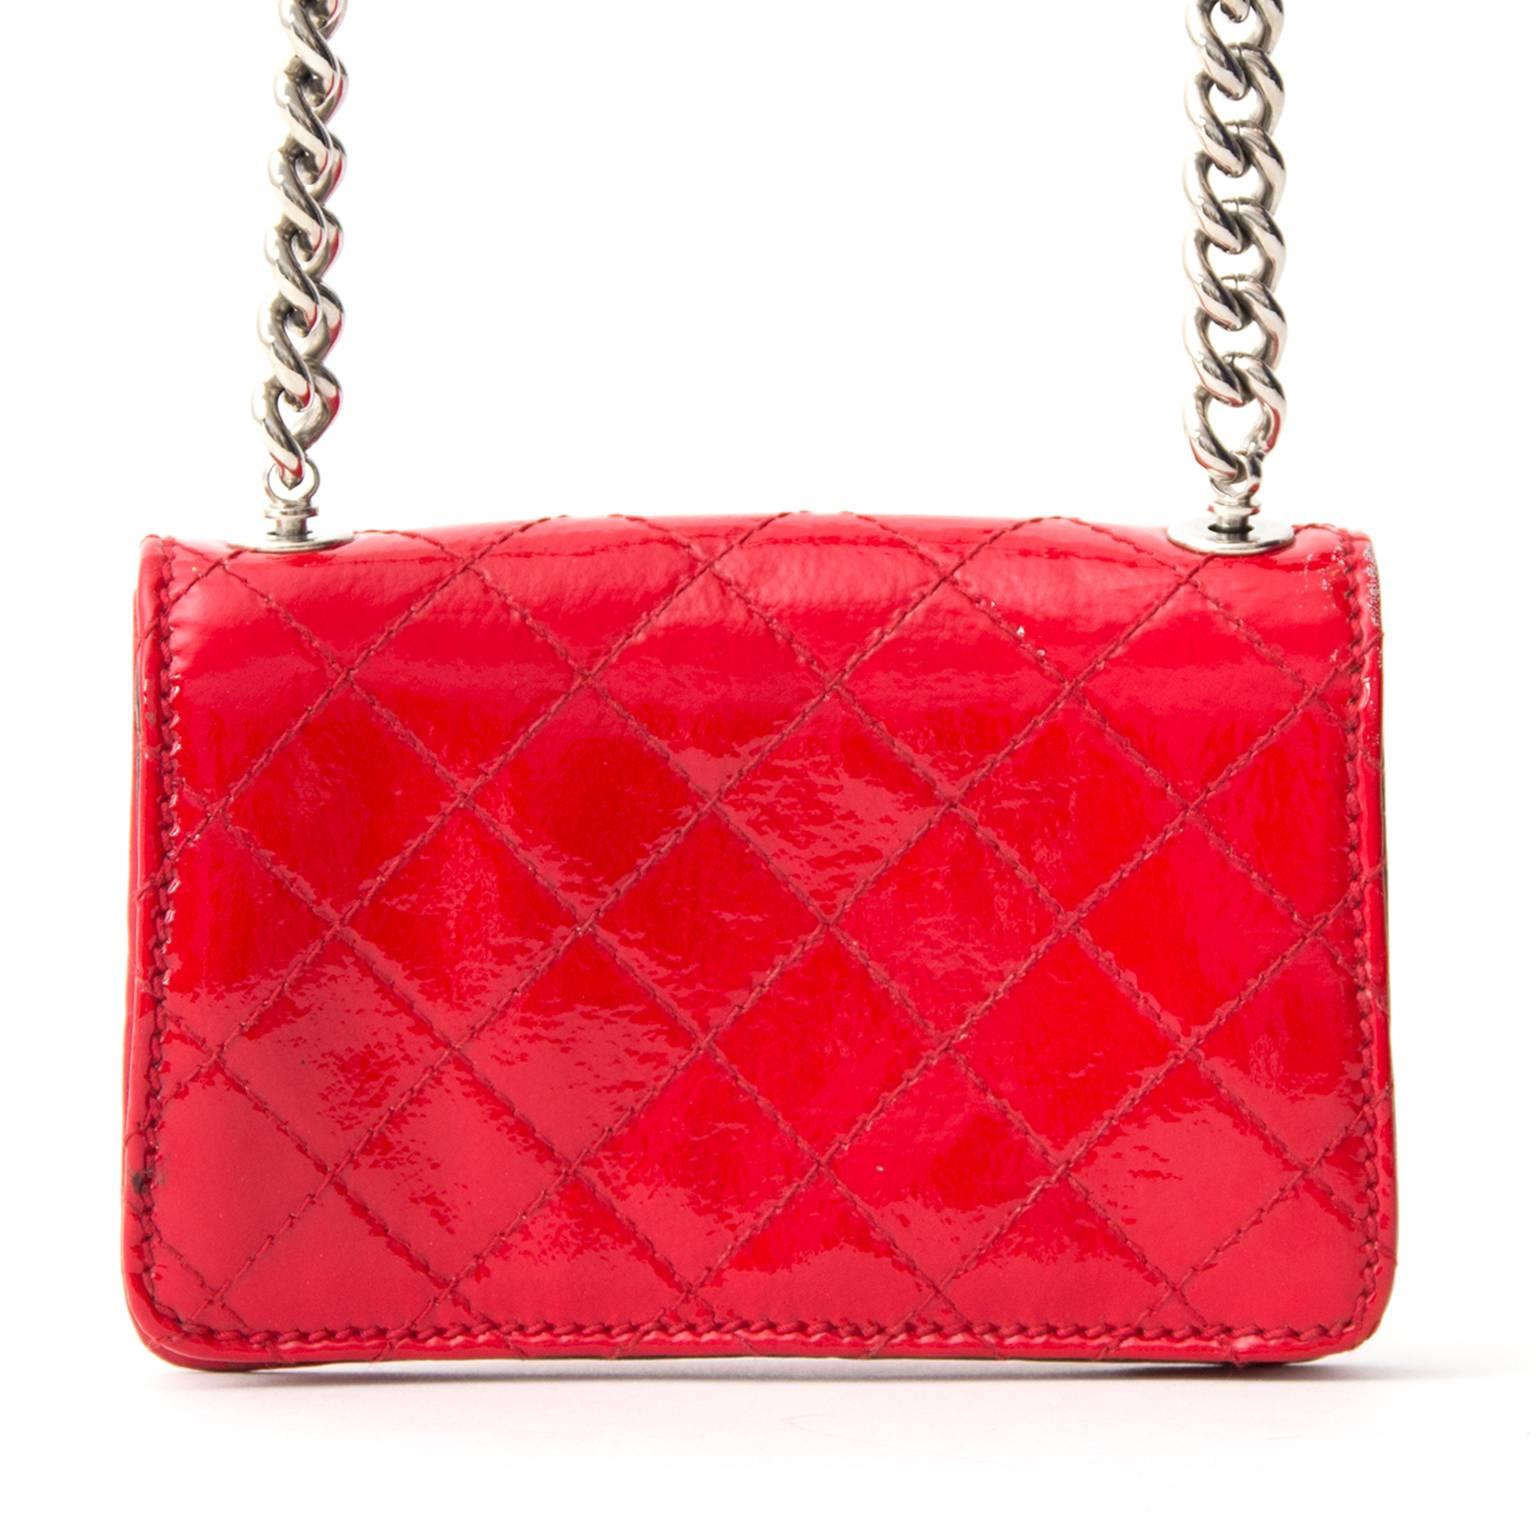 When in doubt... wear red!

Dolce & Gabbana wallet on a chain in bright red. The front flap closes with a press button. Mark the silver-tone eyecatching D&G sign. 

Interior features canvas lining. 